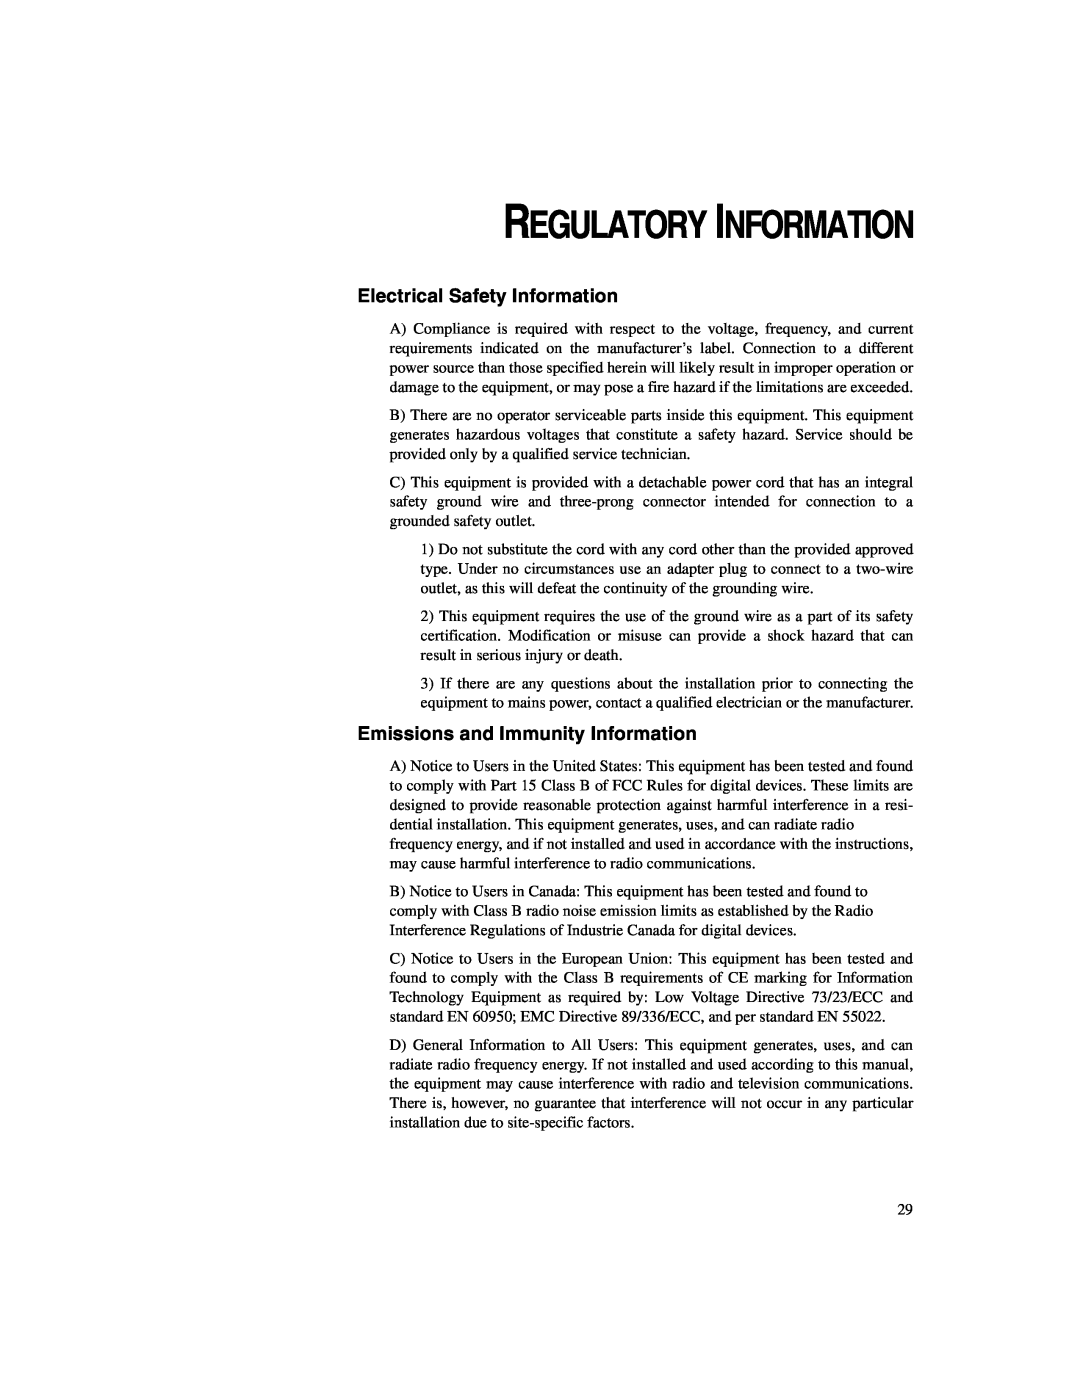 Elo TouchSystems ET2187C-4XWA-1 Regulatory Information, Electrical Safety Information, Emissions and Immunity Information 